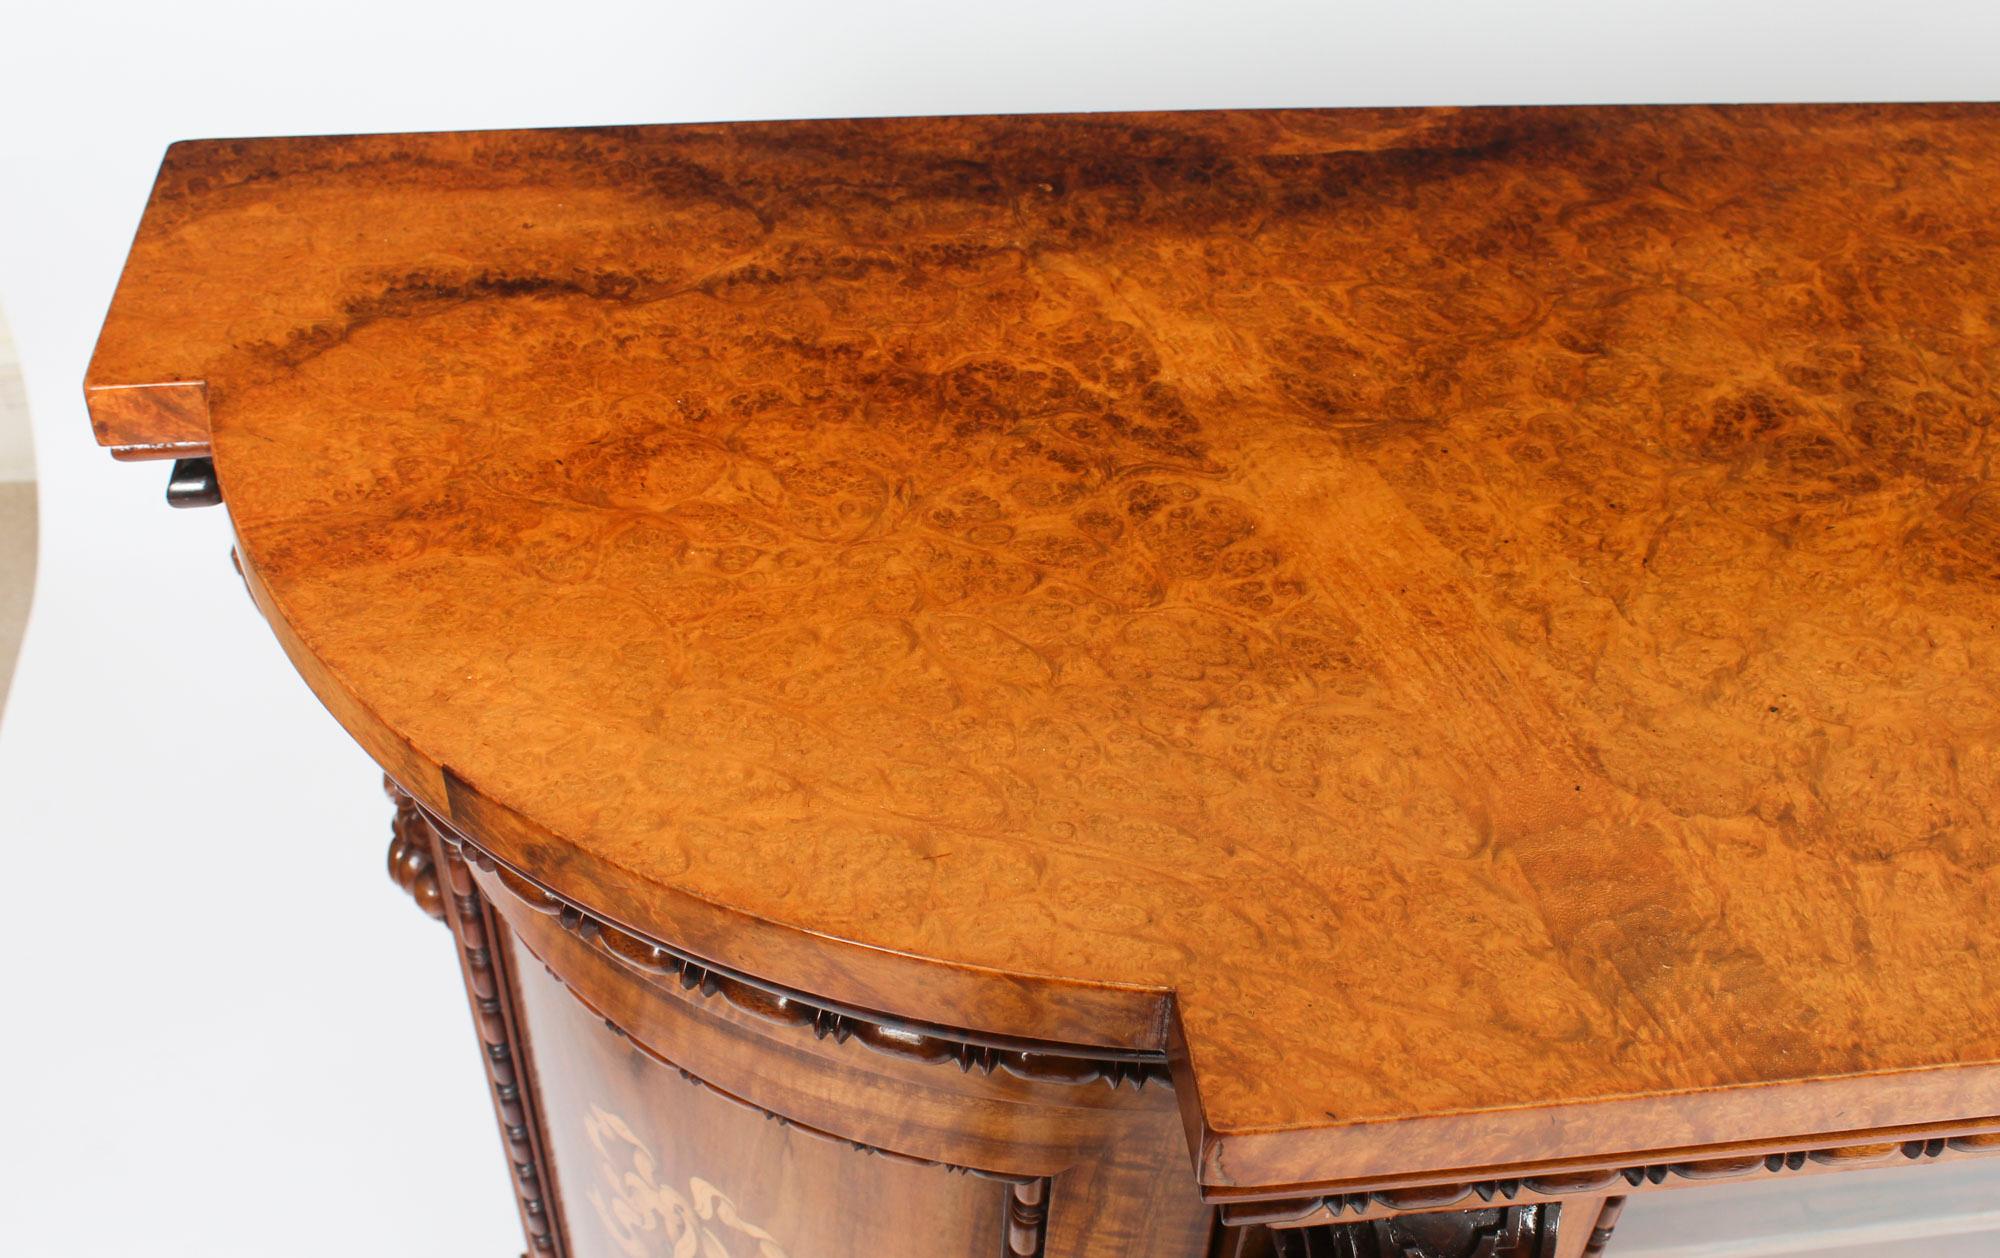 This is a superb antique early Victorian bow ended burr walnut, Gonçalo alves and marquetry inlaid credenza, circa 1850 in date.

The entire piece highlights the unique and truly exceptional pattern of the book matched burr walnut veneers on the